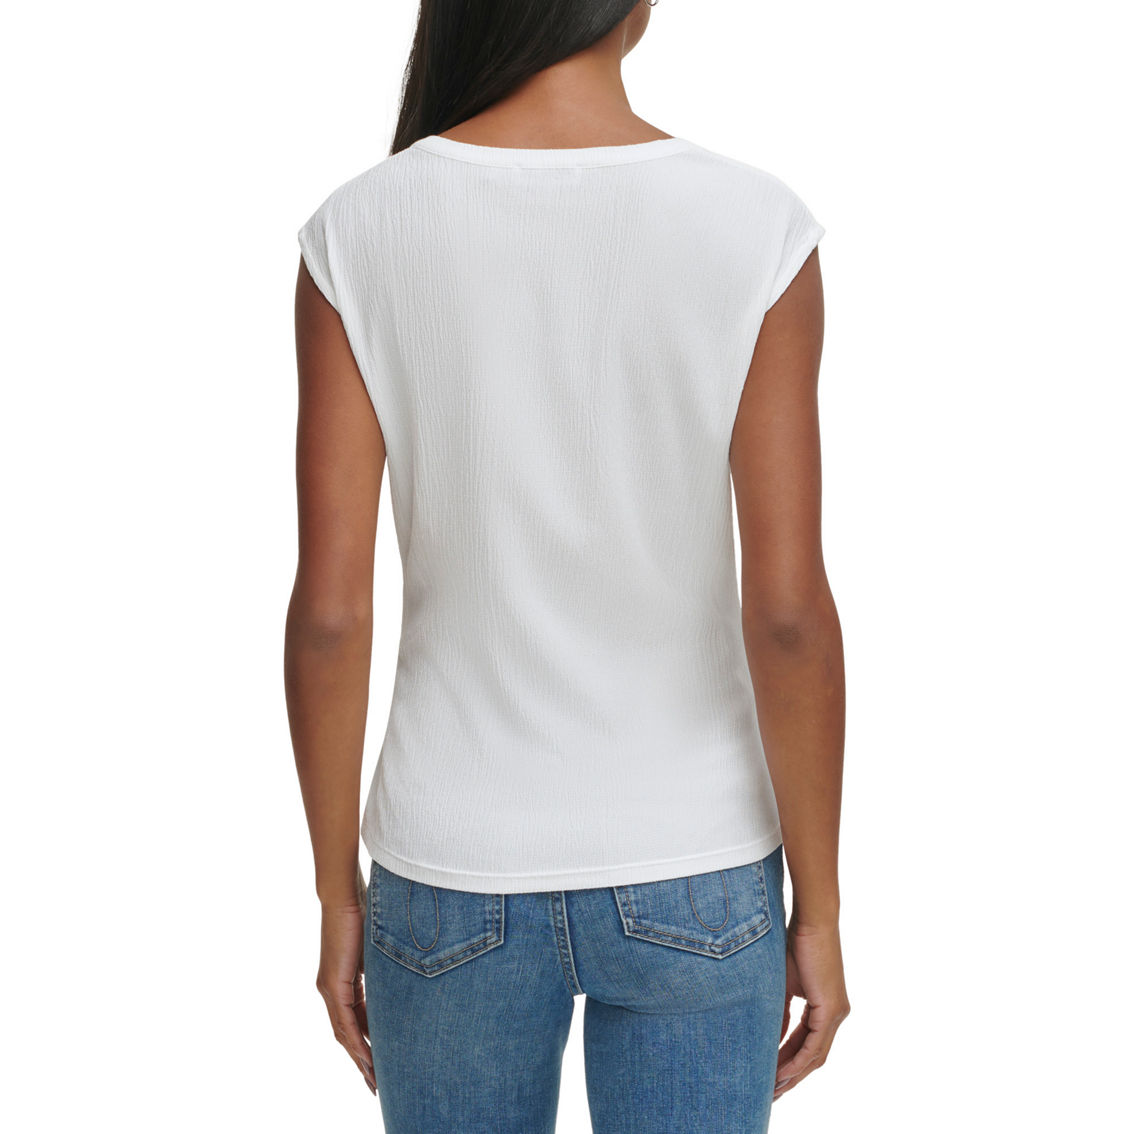 Calvin Klein Square Neck Textured Knit Button Detail Top - Image 2 of 4